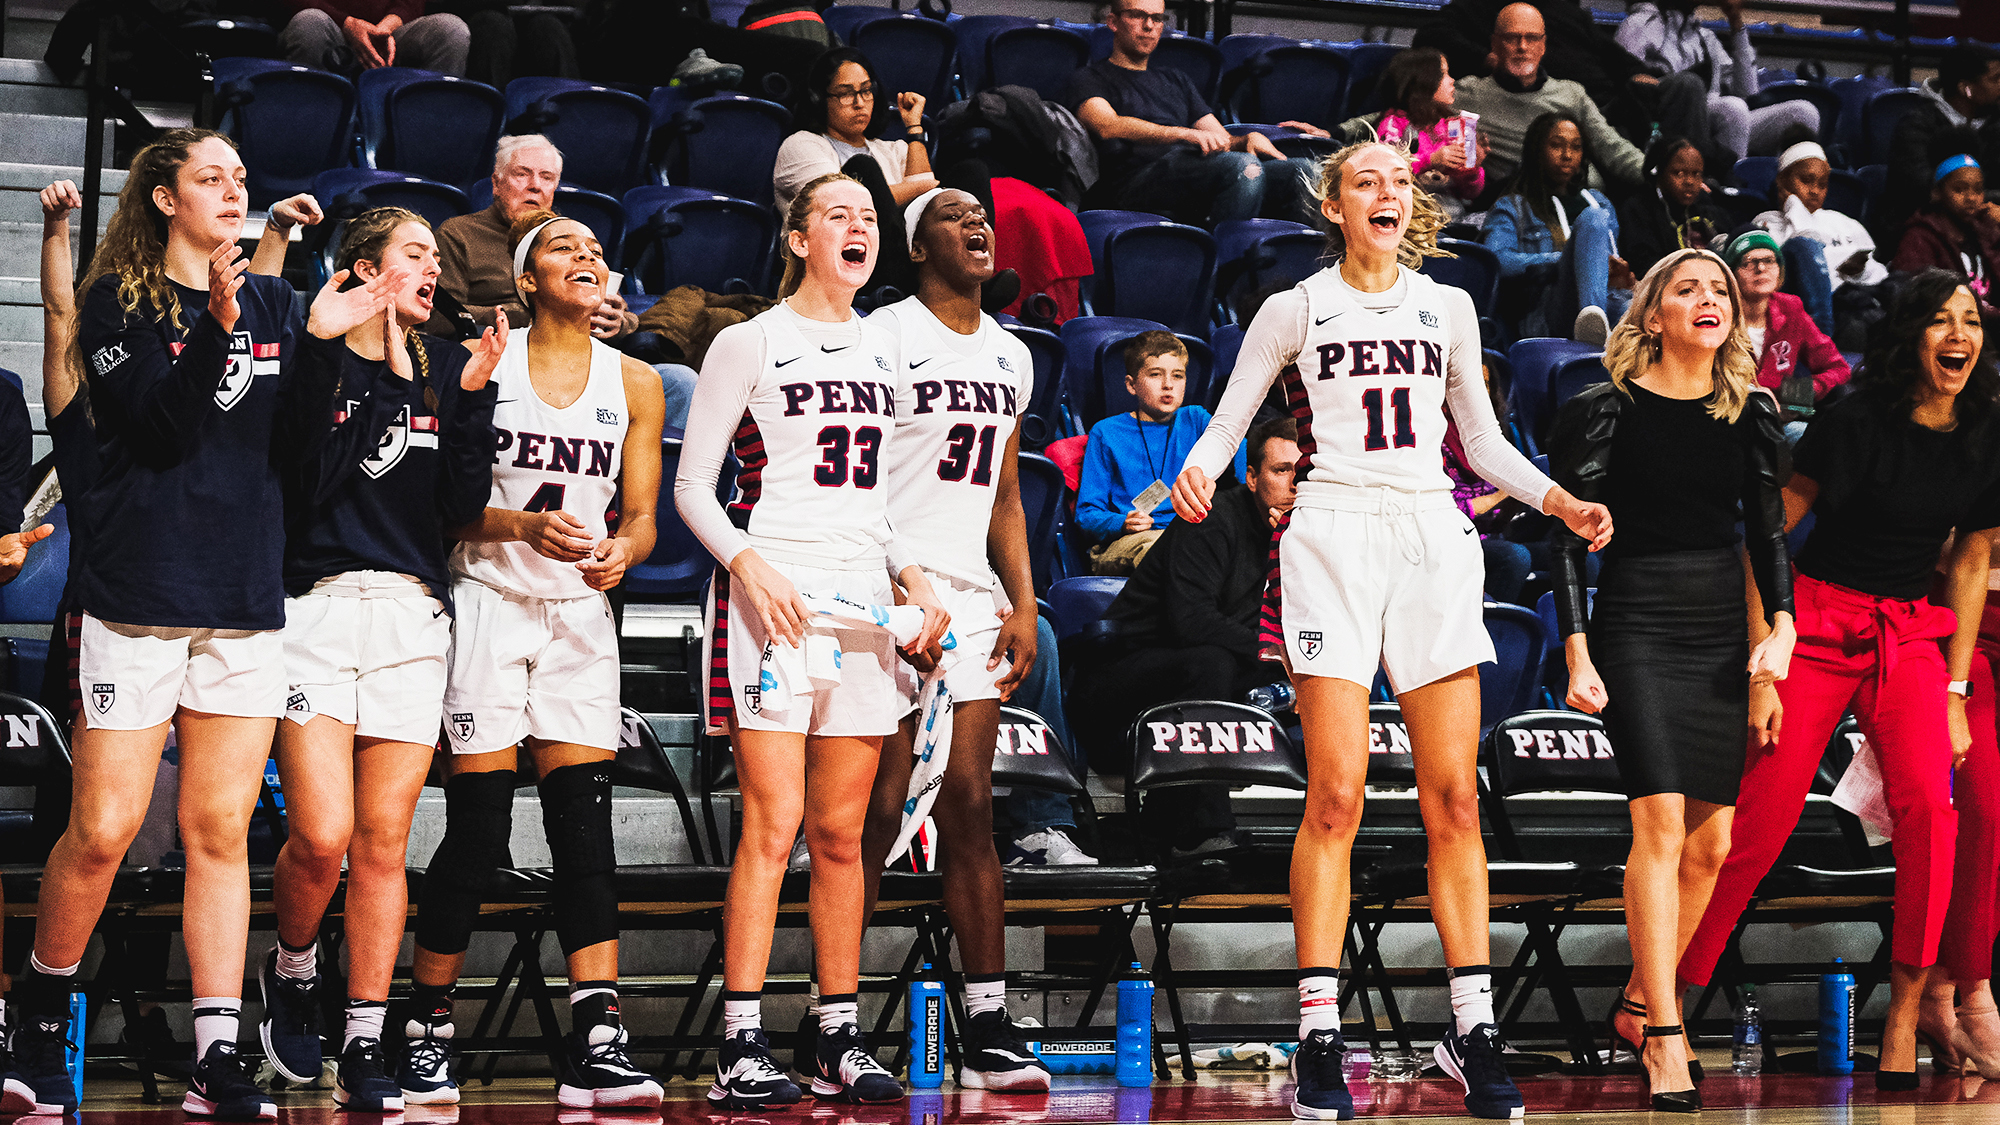 Members of the women's basketball team cheer on their teammates from the bench at the Palestra.